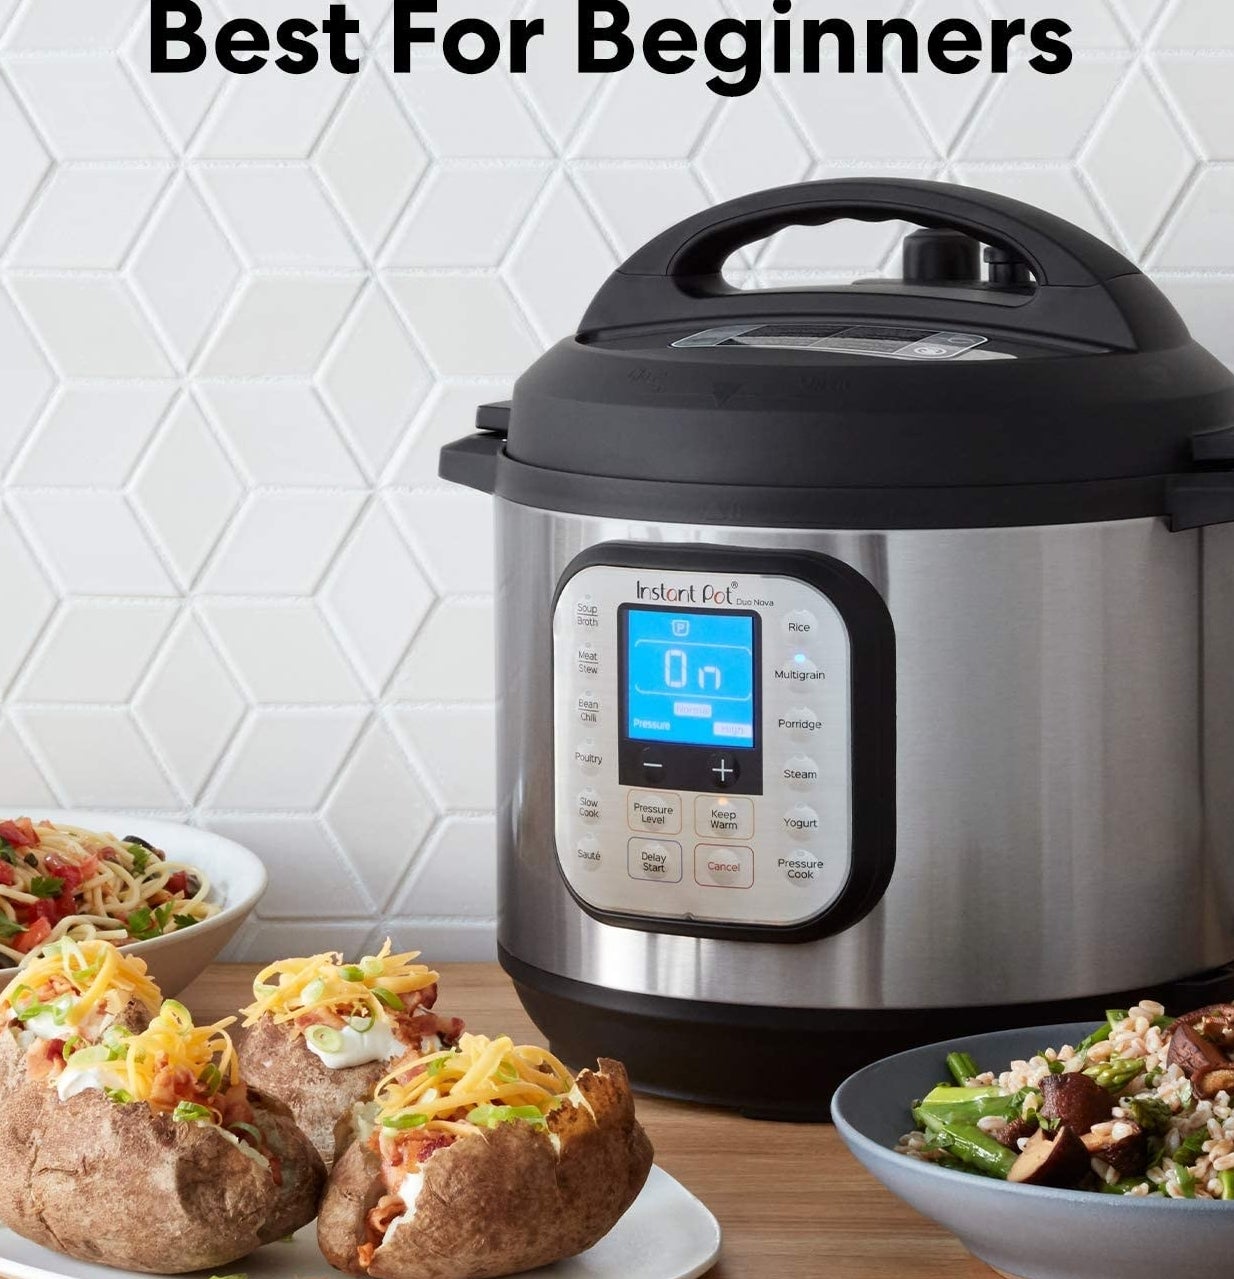 An Instant Pot on a counter surrounded by food